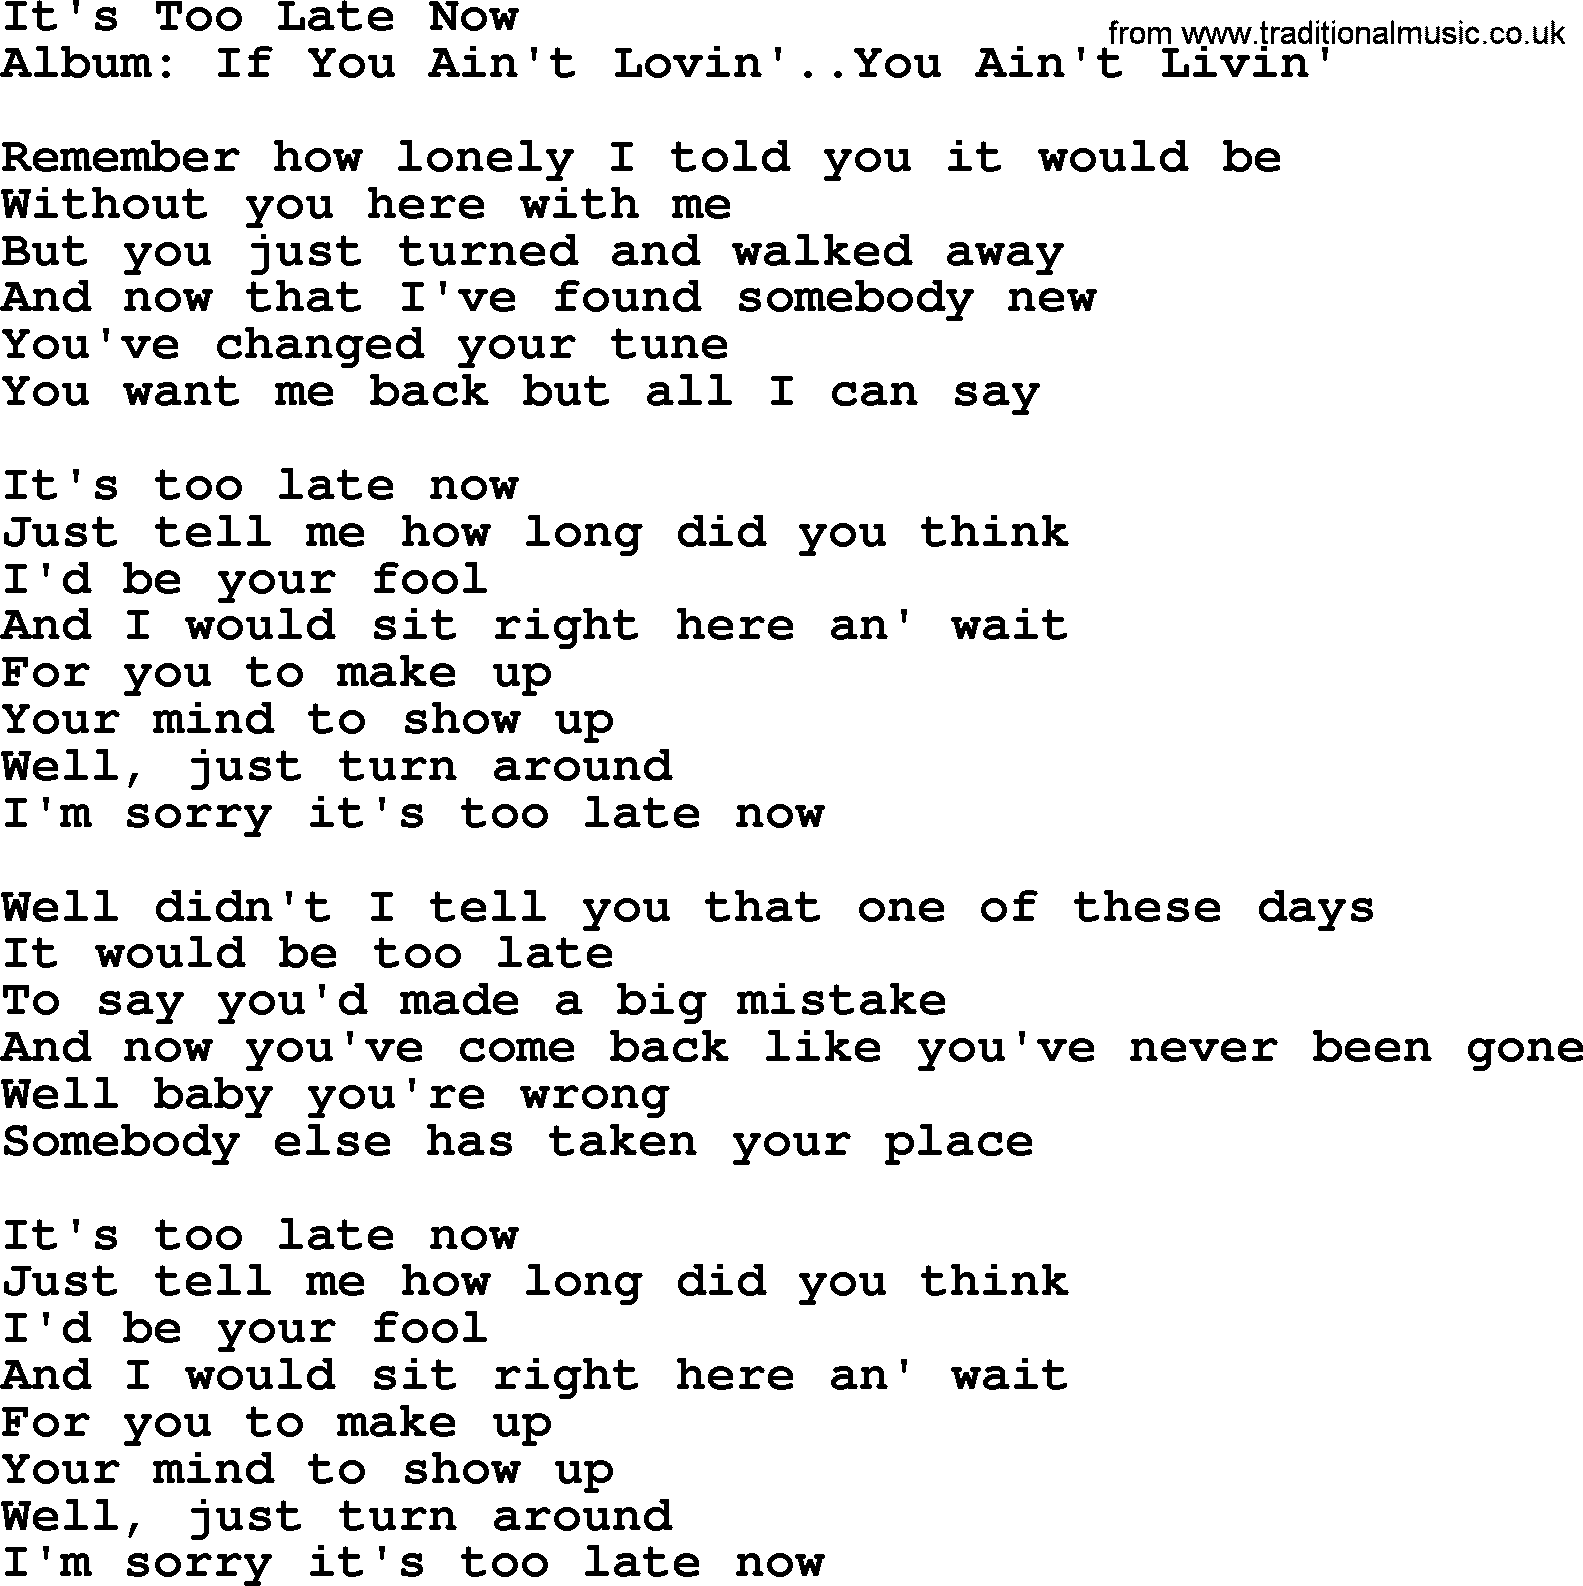 George Strait song: It's Too Late Now, lyrics